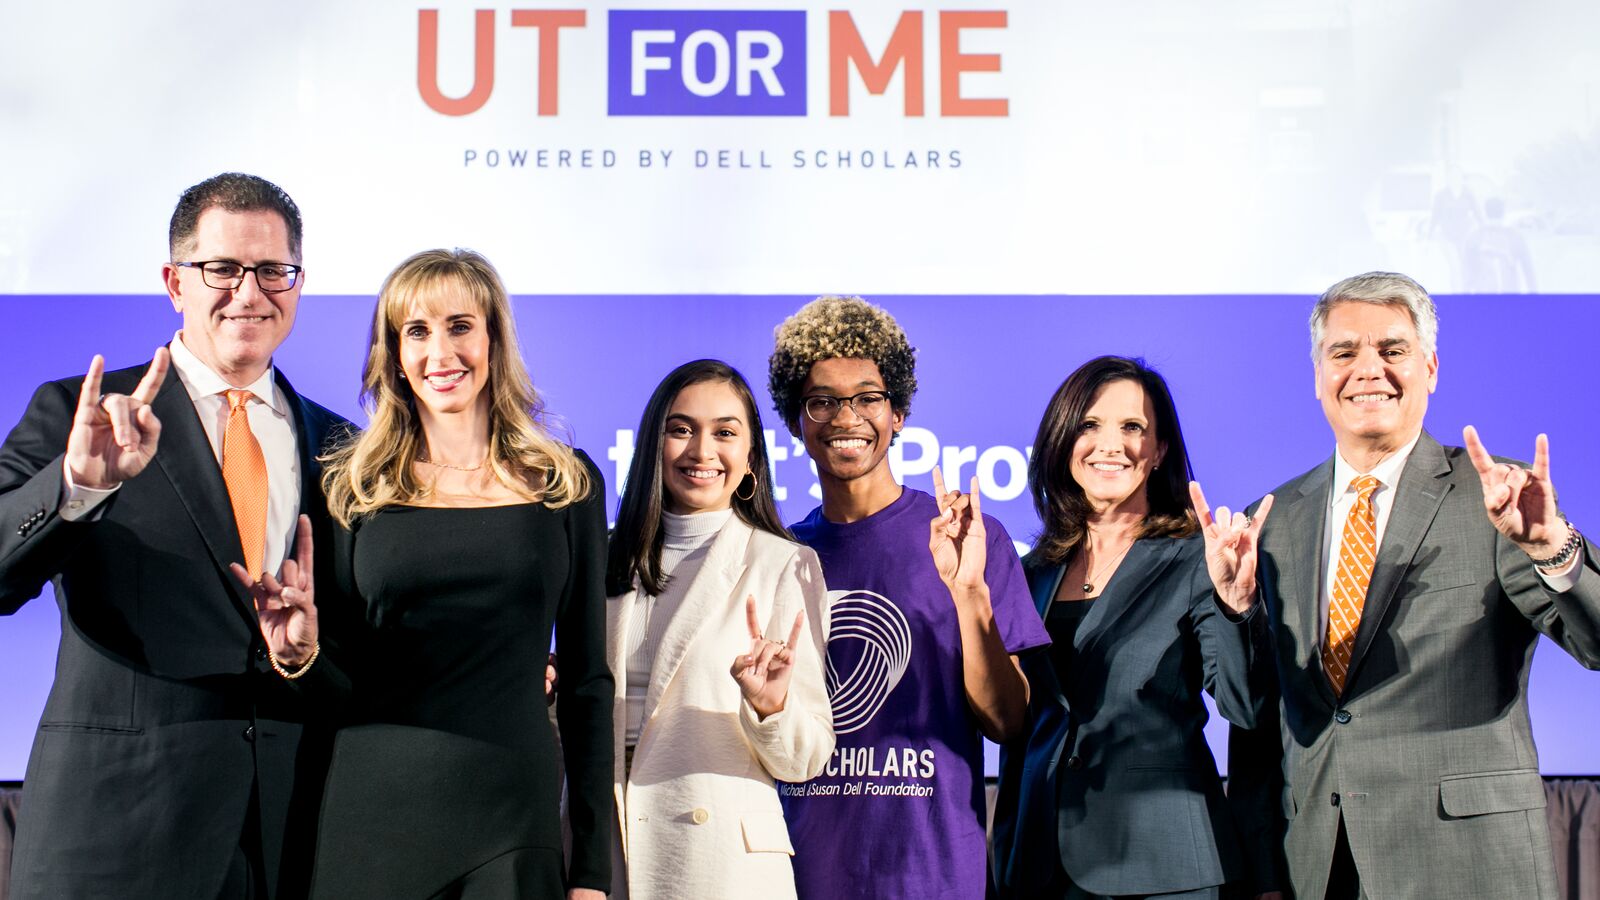 Michael and Susan Dell stand with Dell Scholars and UT Austin president.